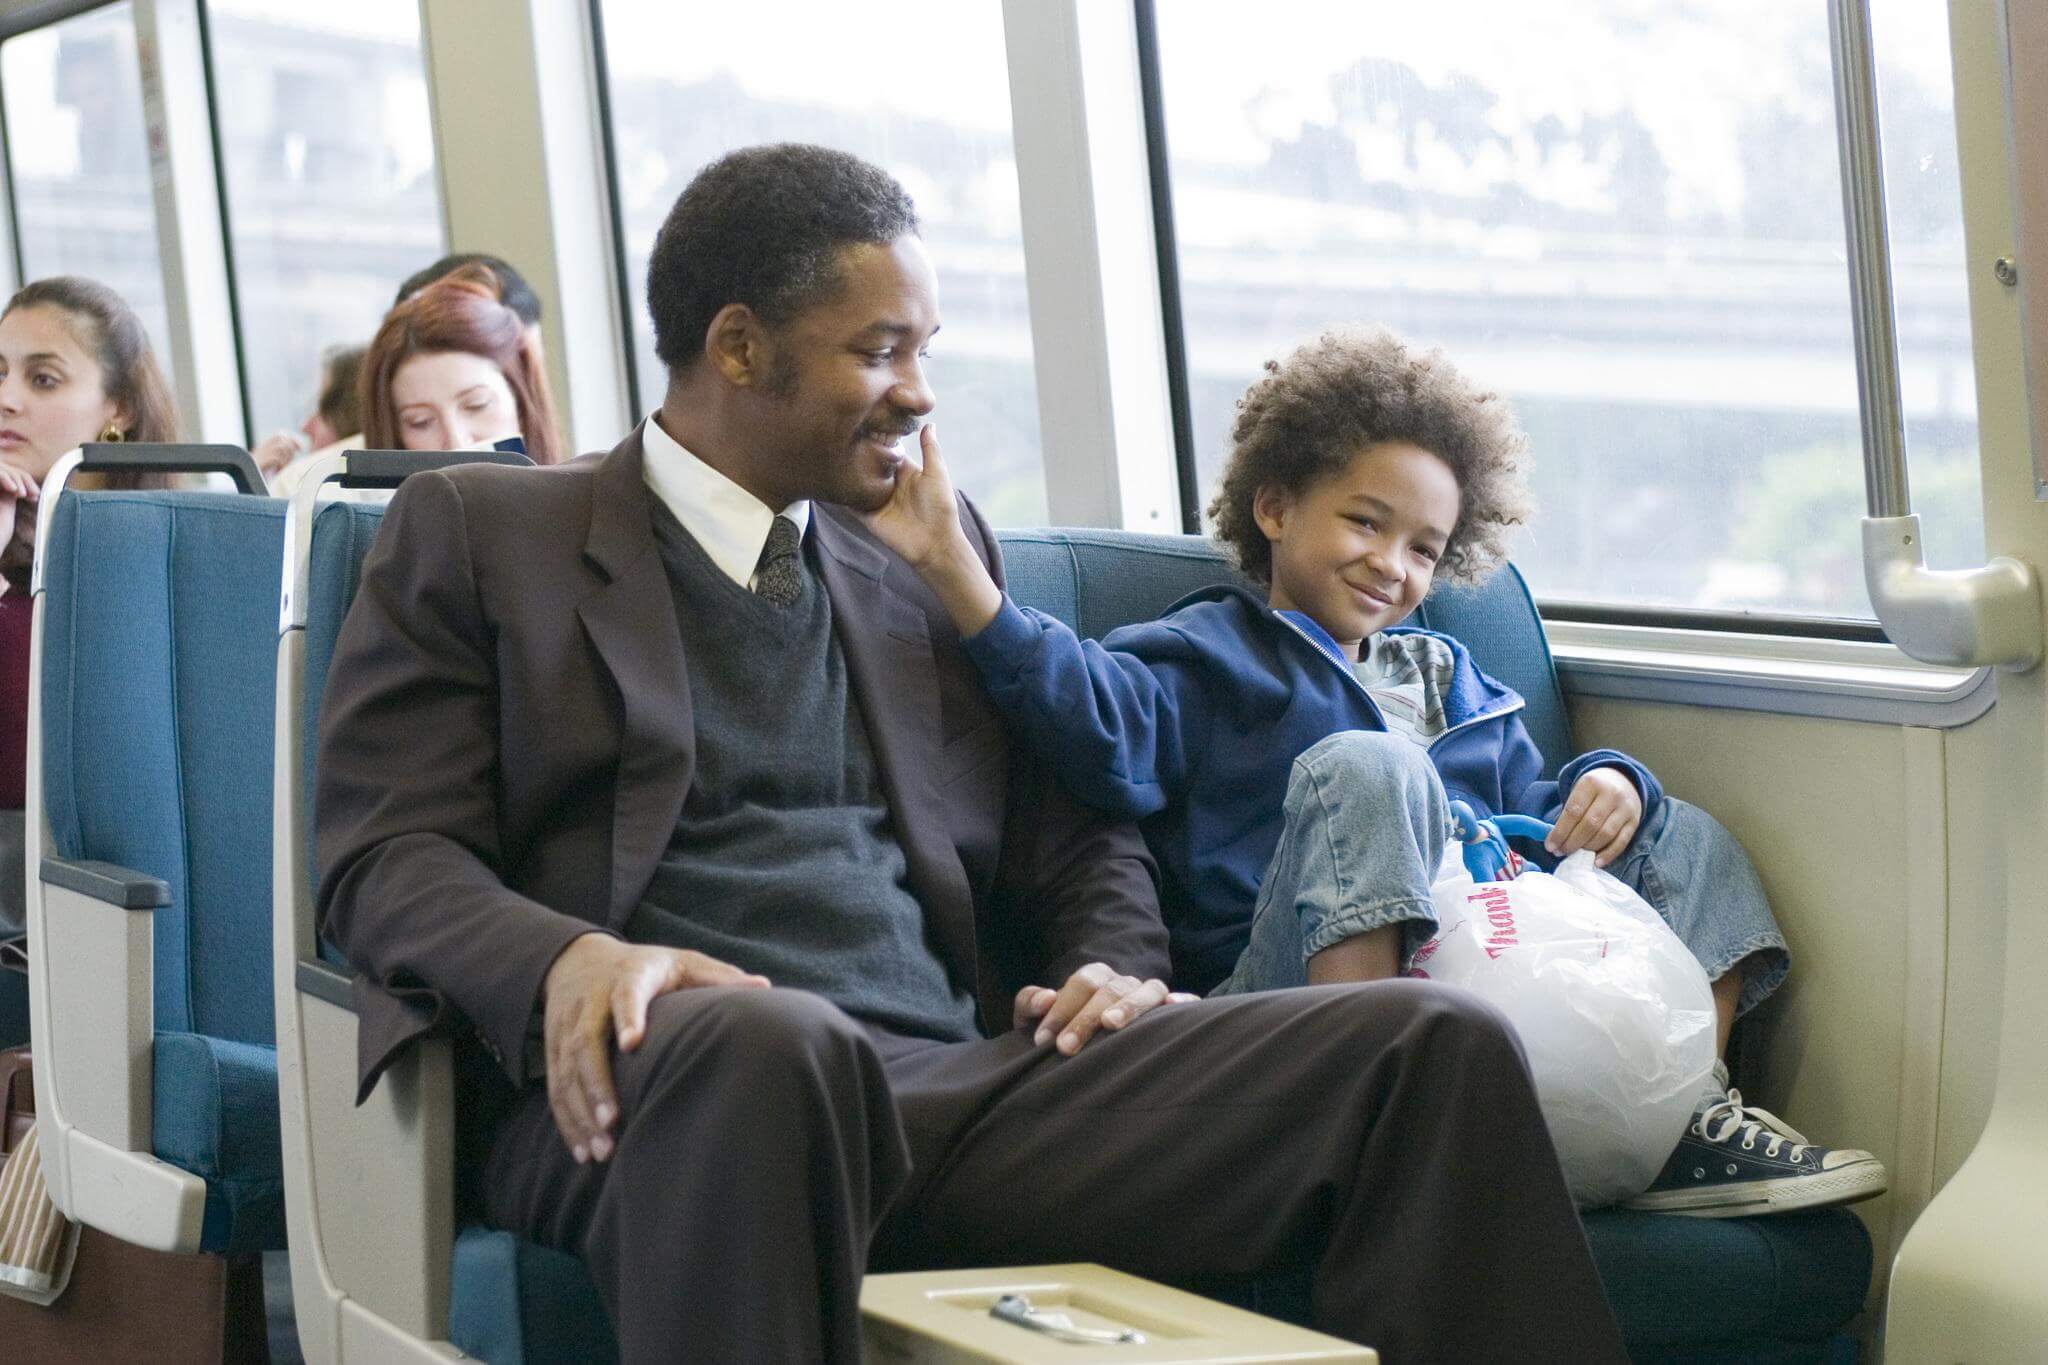 In The Pursuit of Happyness